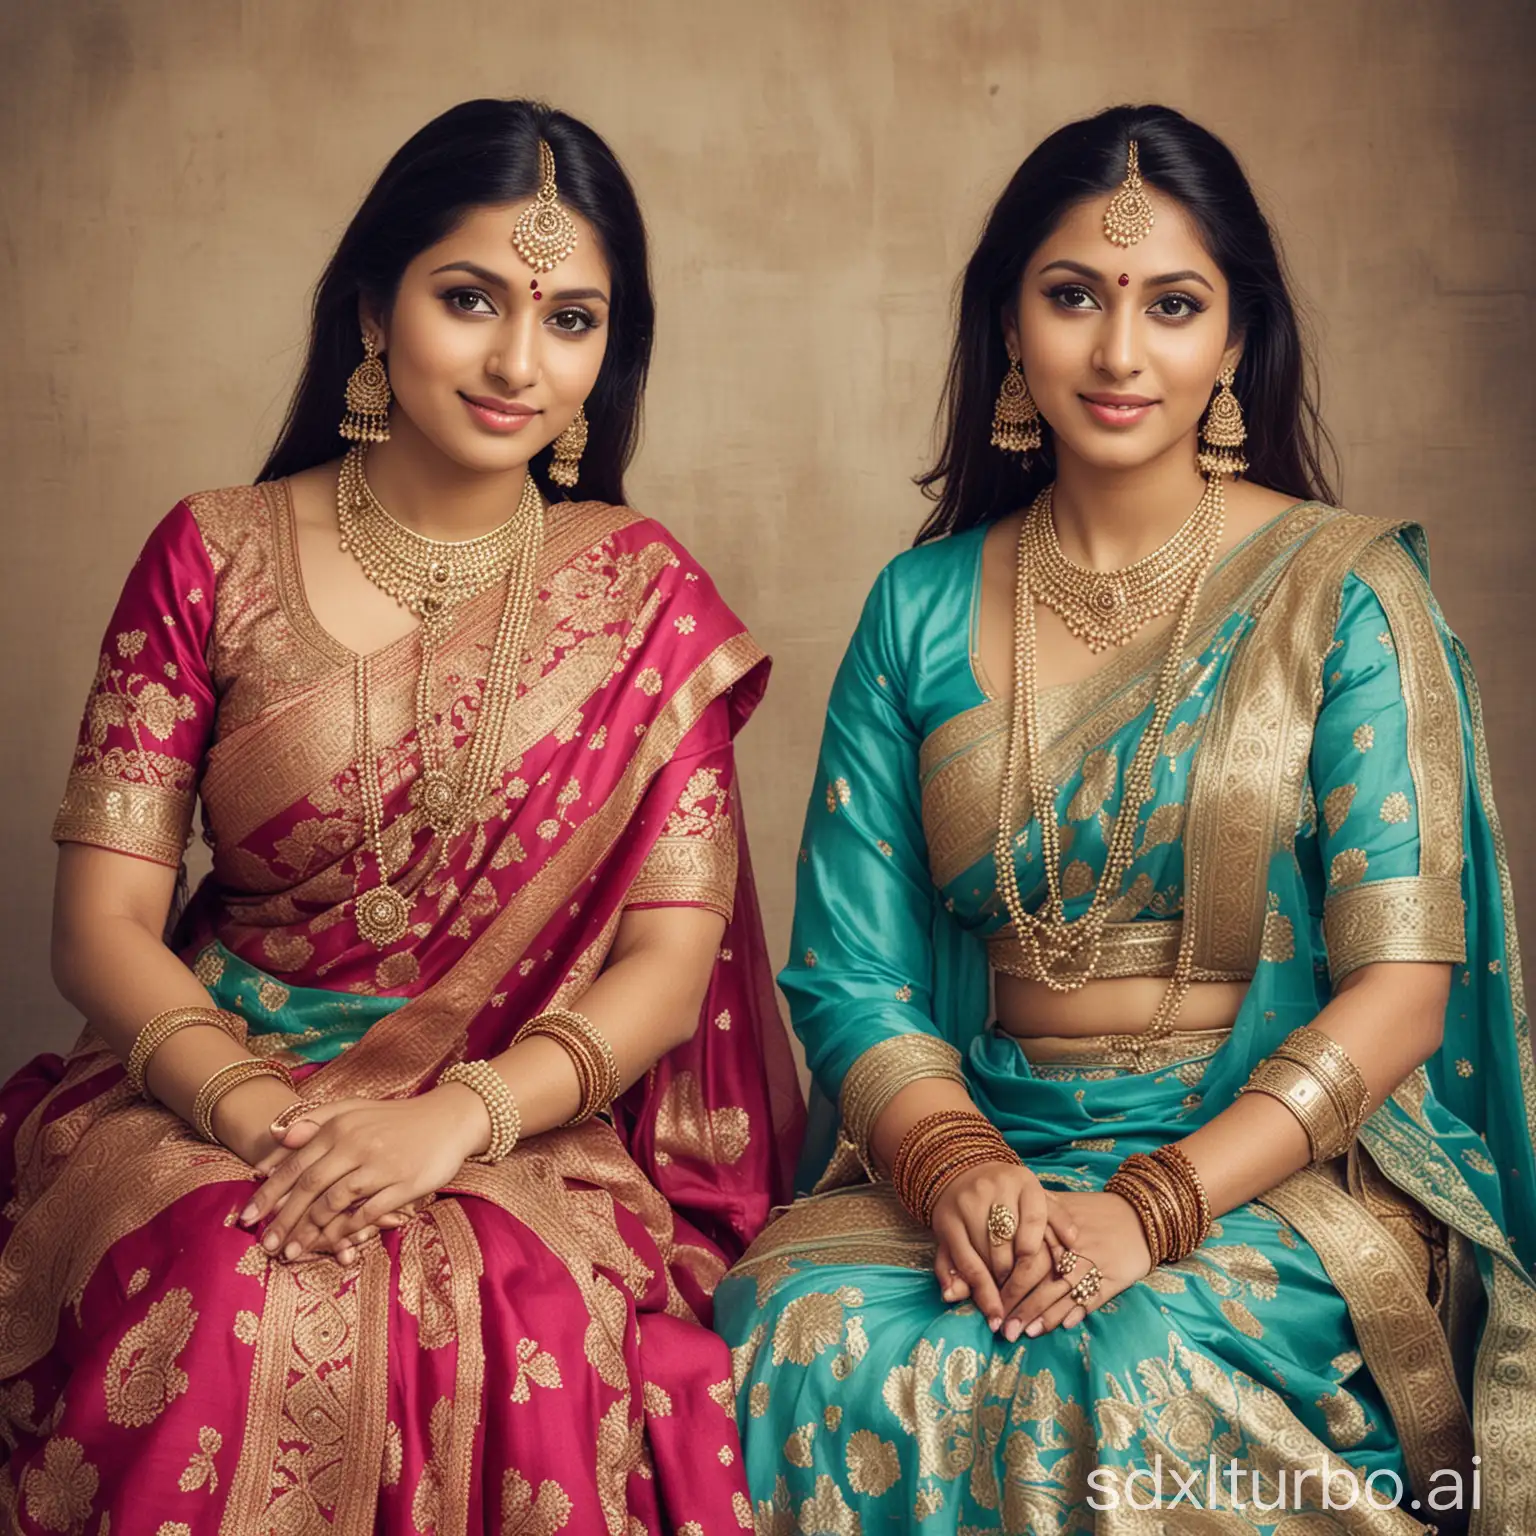 Two-Beautiful-Indian-Women-in-Traditional-Attire-Posing-Gracefully